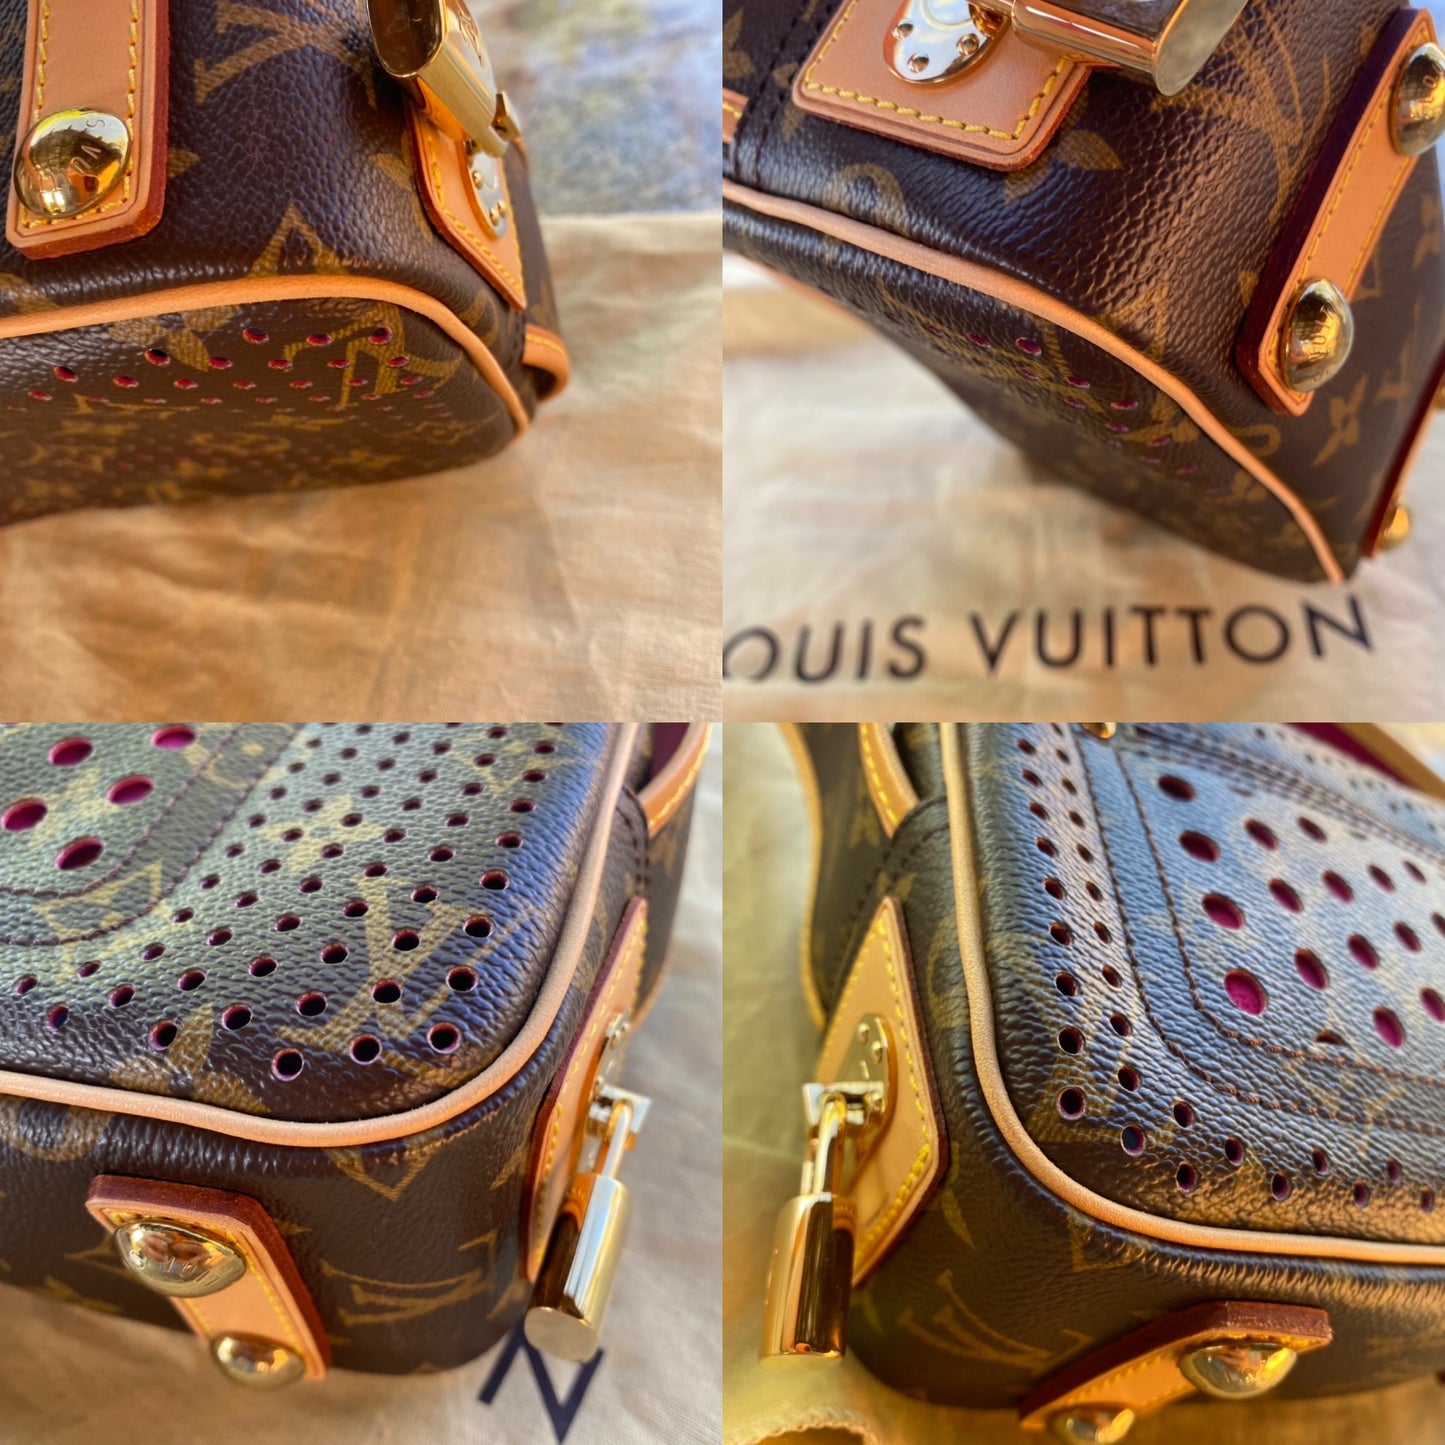 Louis Vuitton Limited Edition Perforated Mini Trocadero Shoulder Bag